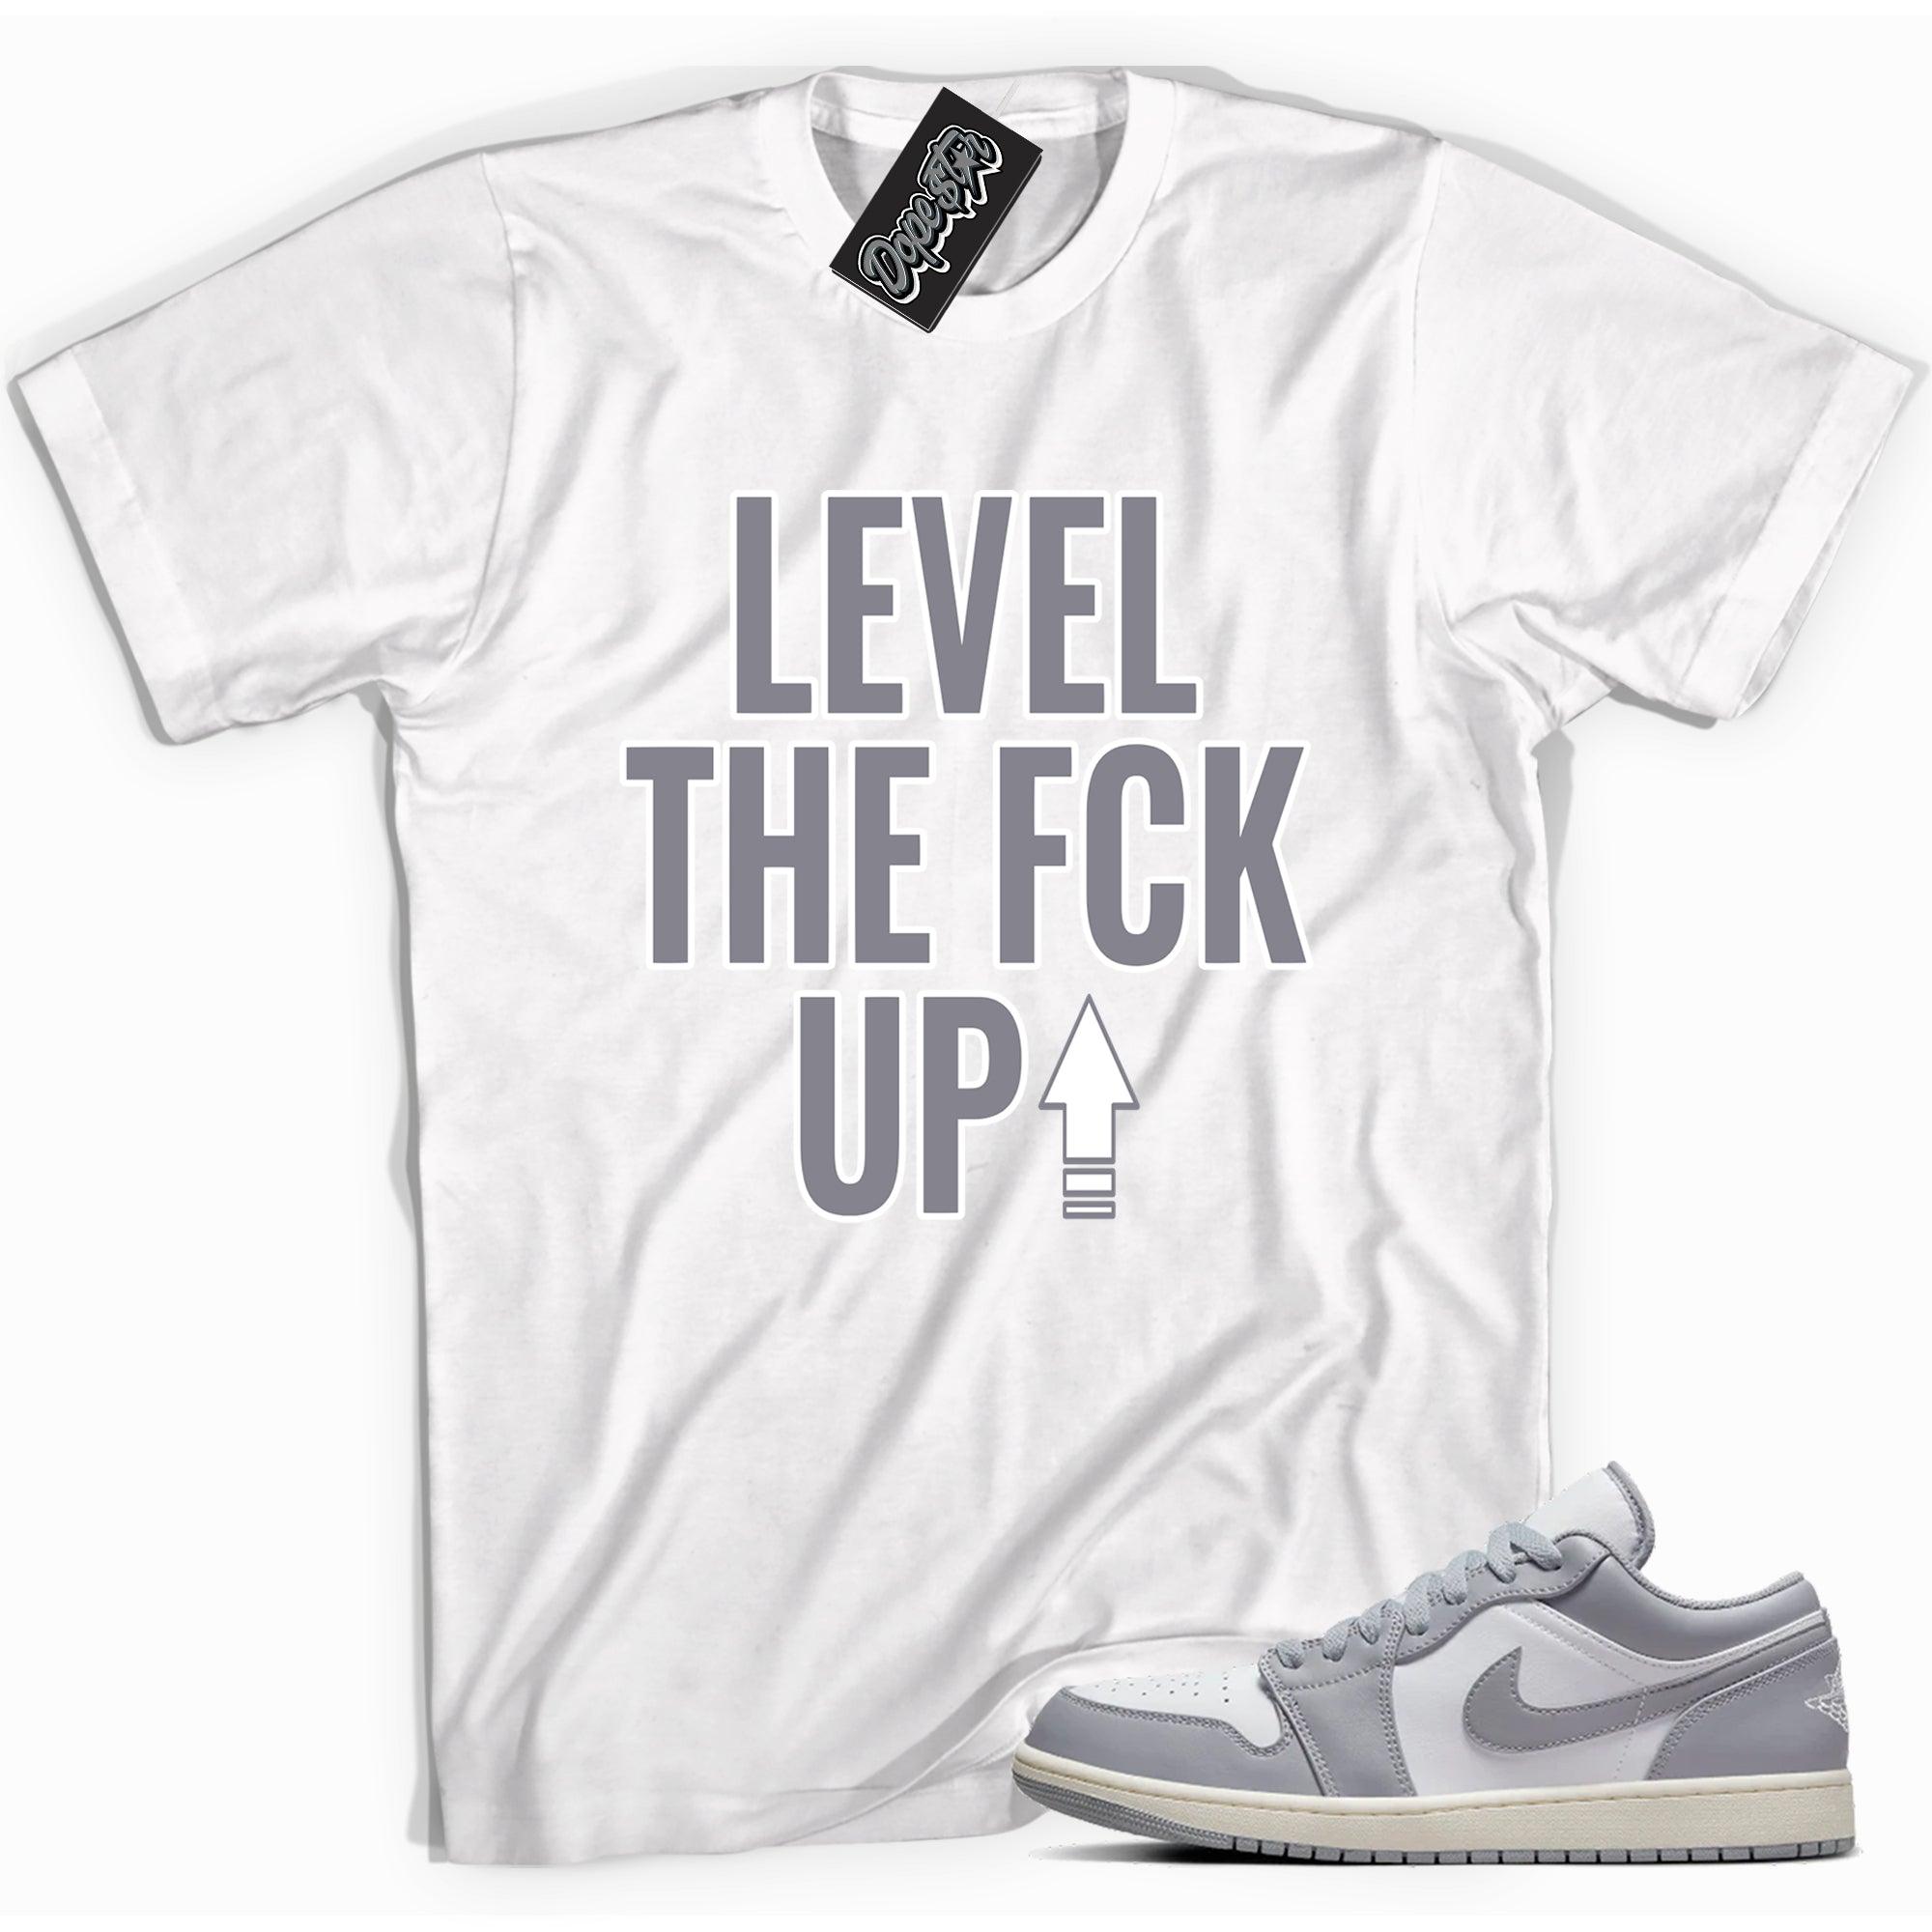 Cool white graphic tee with 'Level Up' print, that perfectly matches Air Jordan 1 Low Vintage Stealth Grey sneakers.